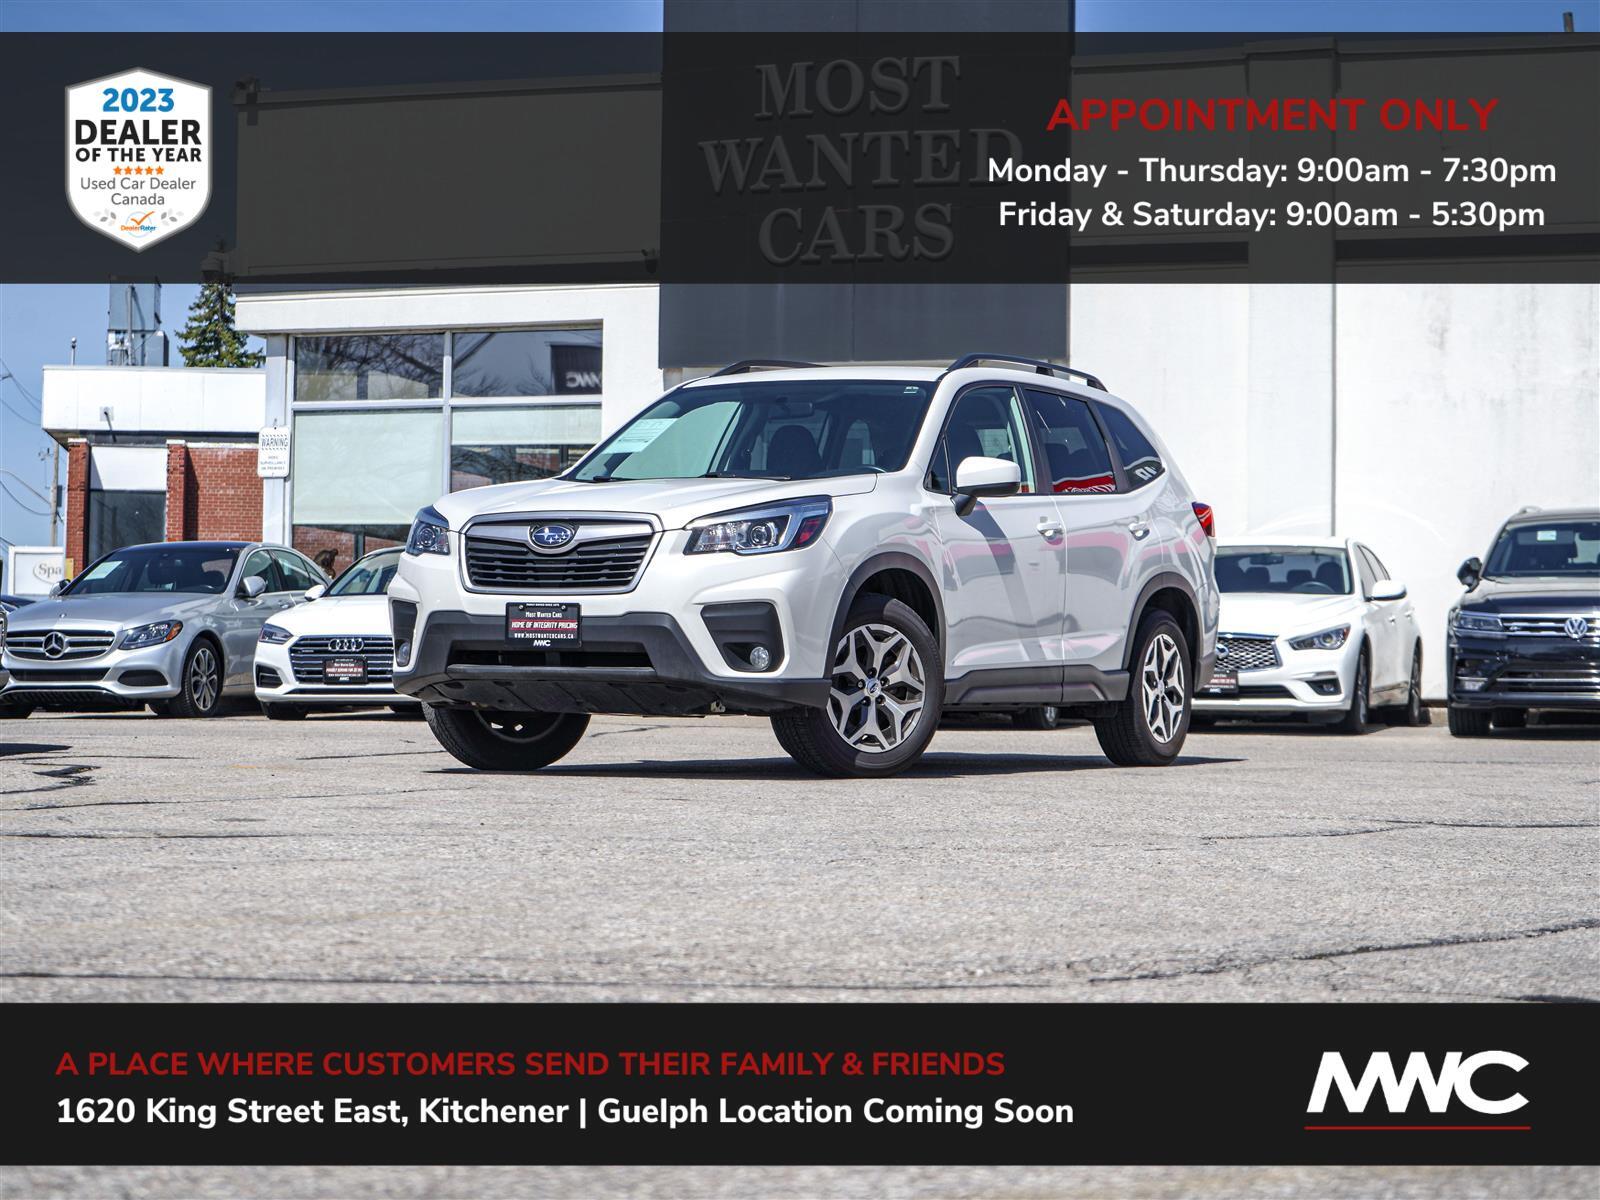 2019 Subaru Forester CONVENIENCE | AWD | HEATED SEATS | APP CONNECT